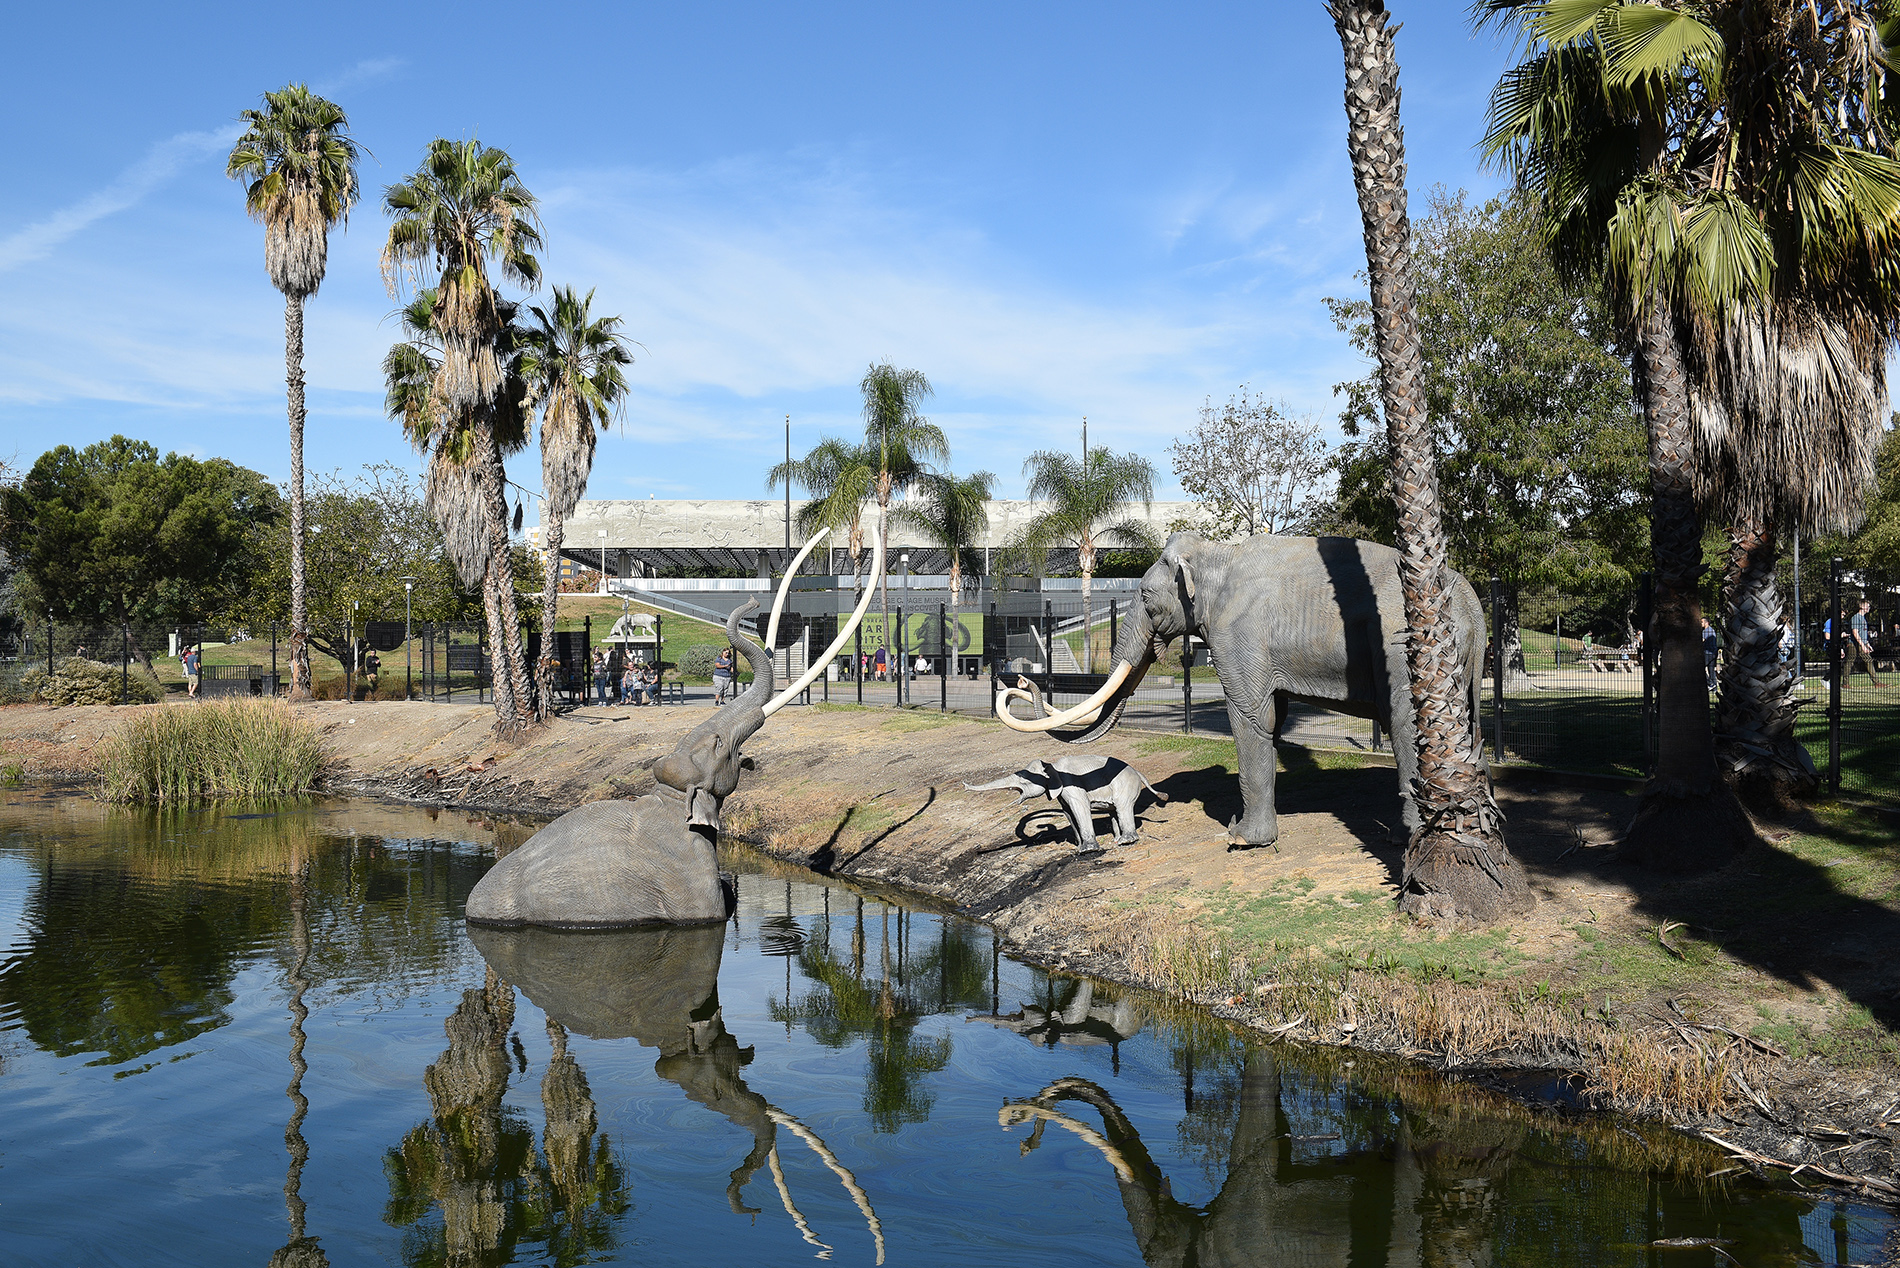 Corny and retro displays are part of the charm of the La Brea Tar Pits.